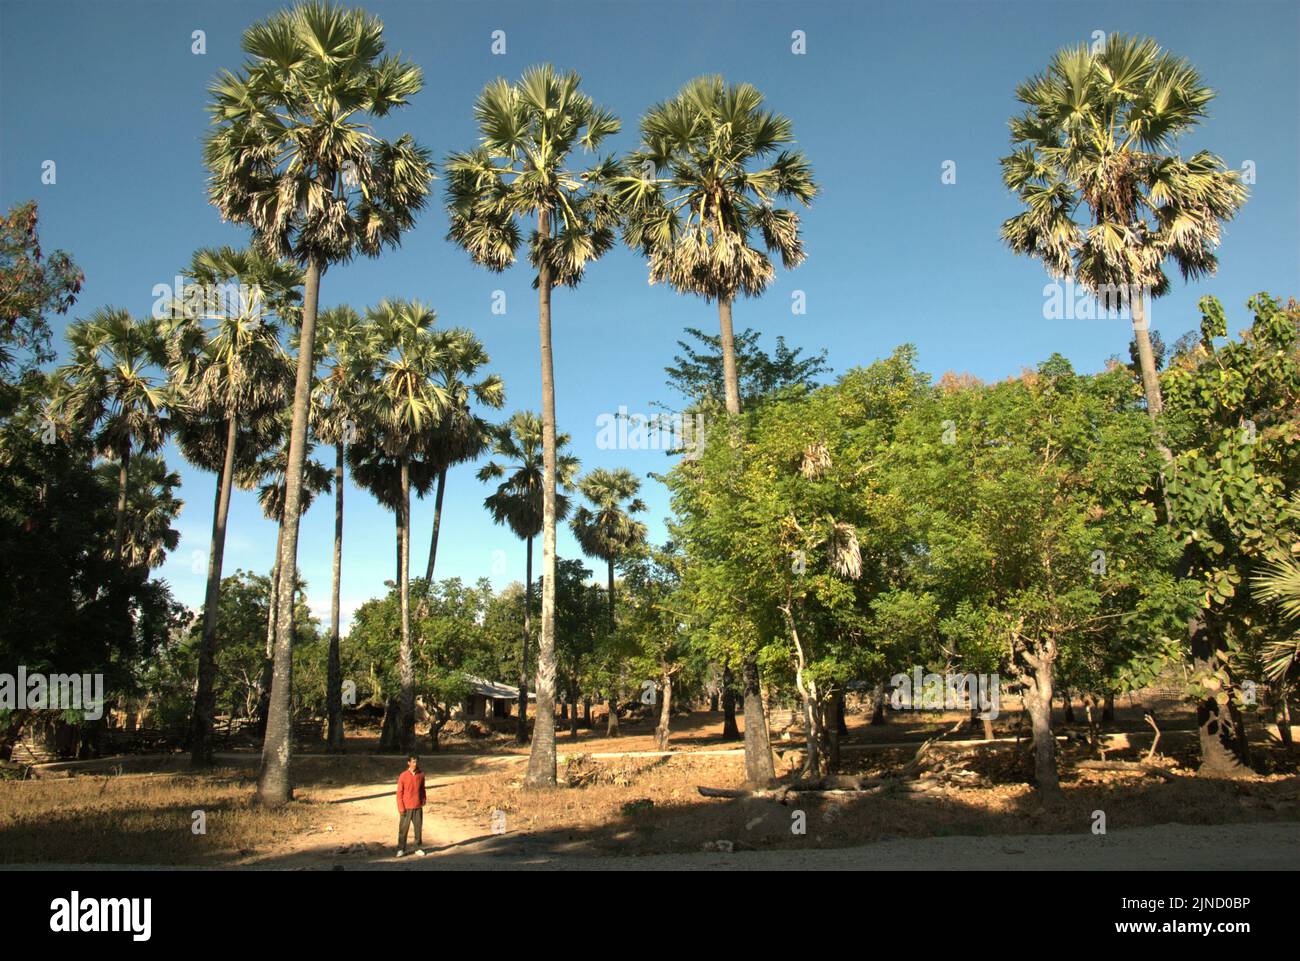 A villager is photographed in front of dry climate trees, including the sugar palm tree (Borassus flabellifer), which is valuable for the locals in Rote Island, East Nusa Tenggara, Indonesia. Stock Photo